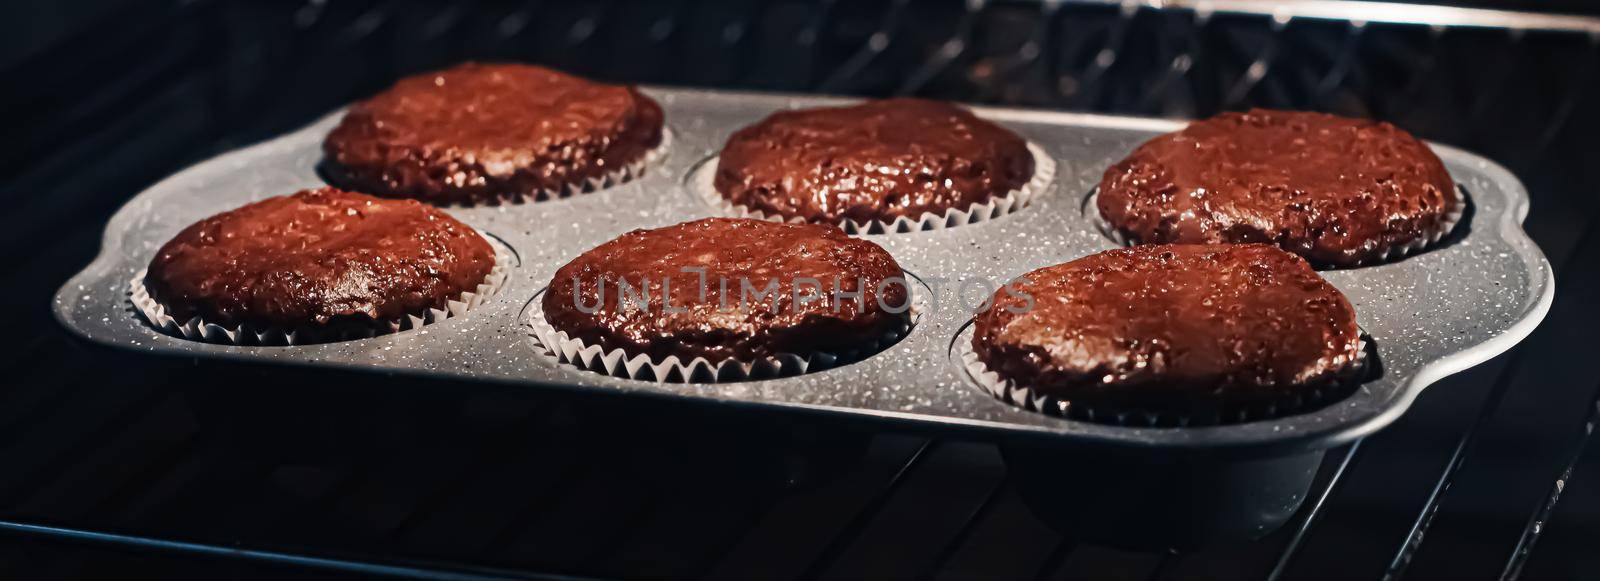 Chocolate muffins baking in the oven, homemade comfort food recipe concept